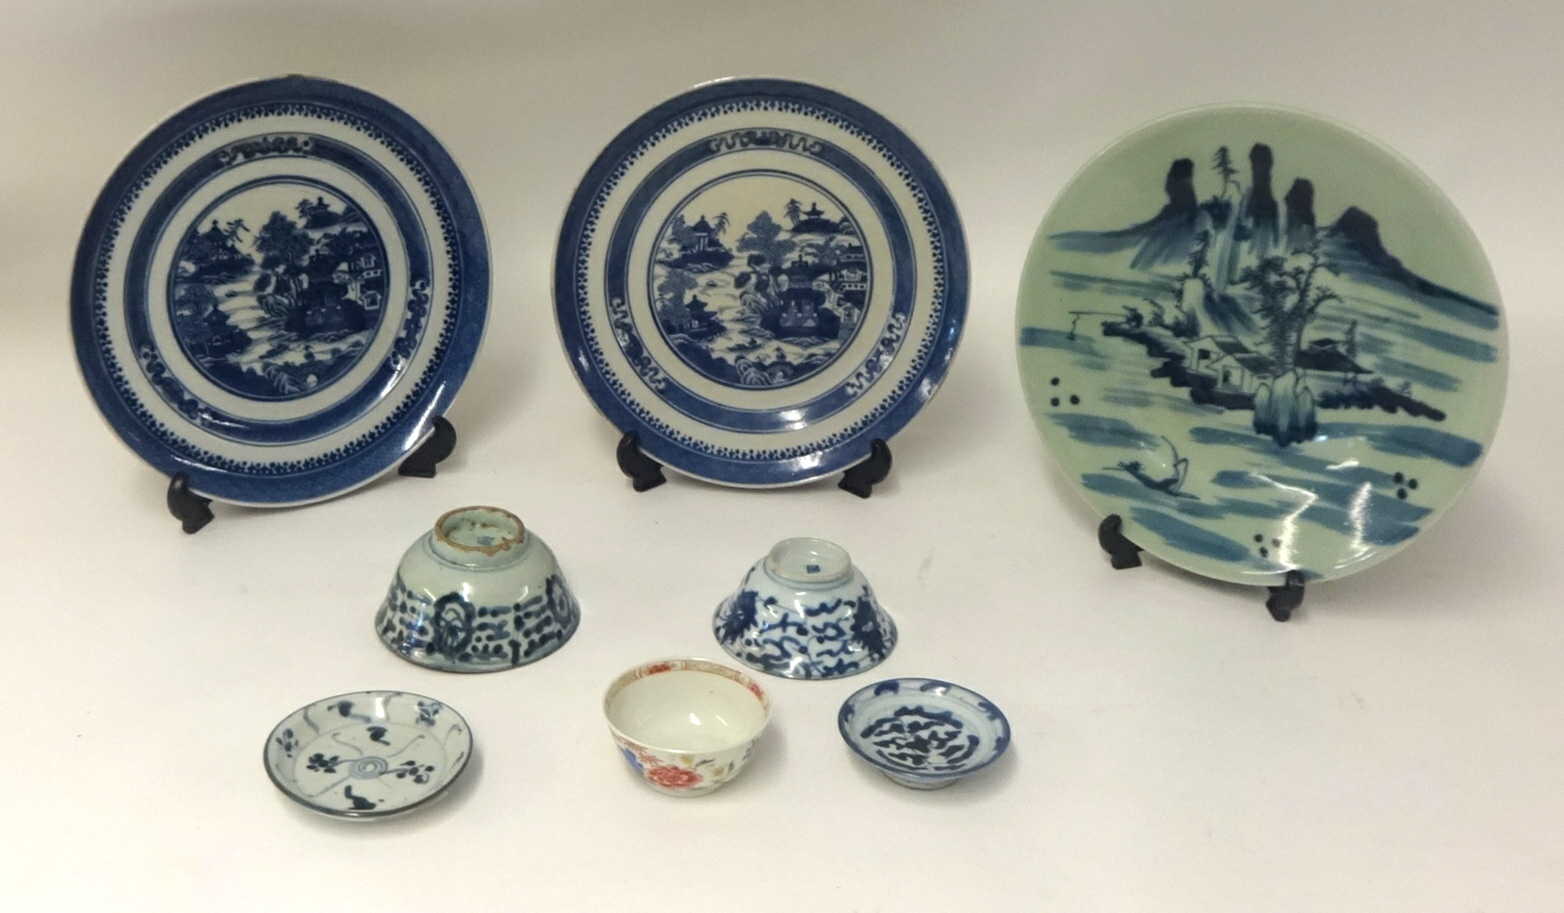 Eight pieces of Chinese porcelain 18th century and later